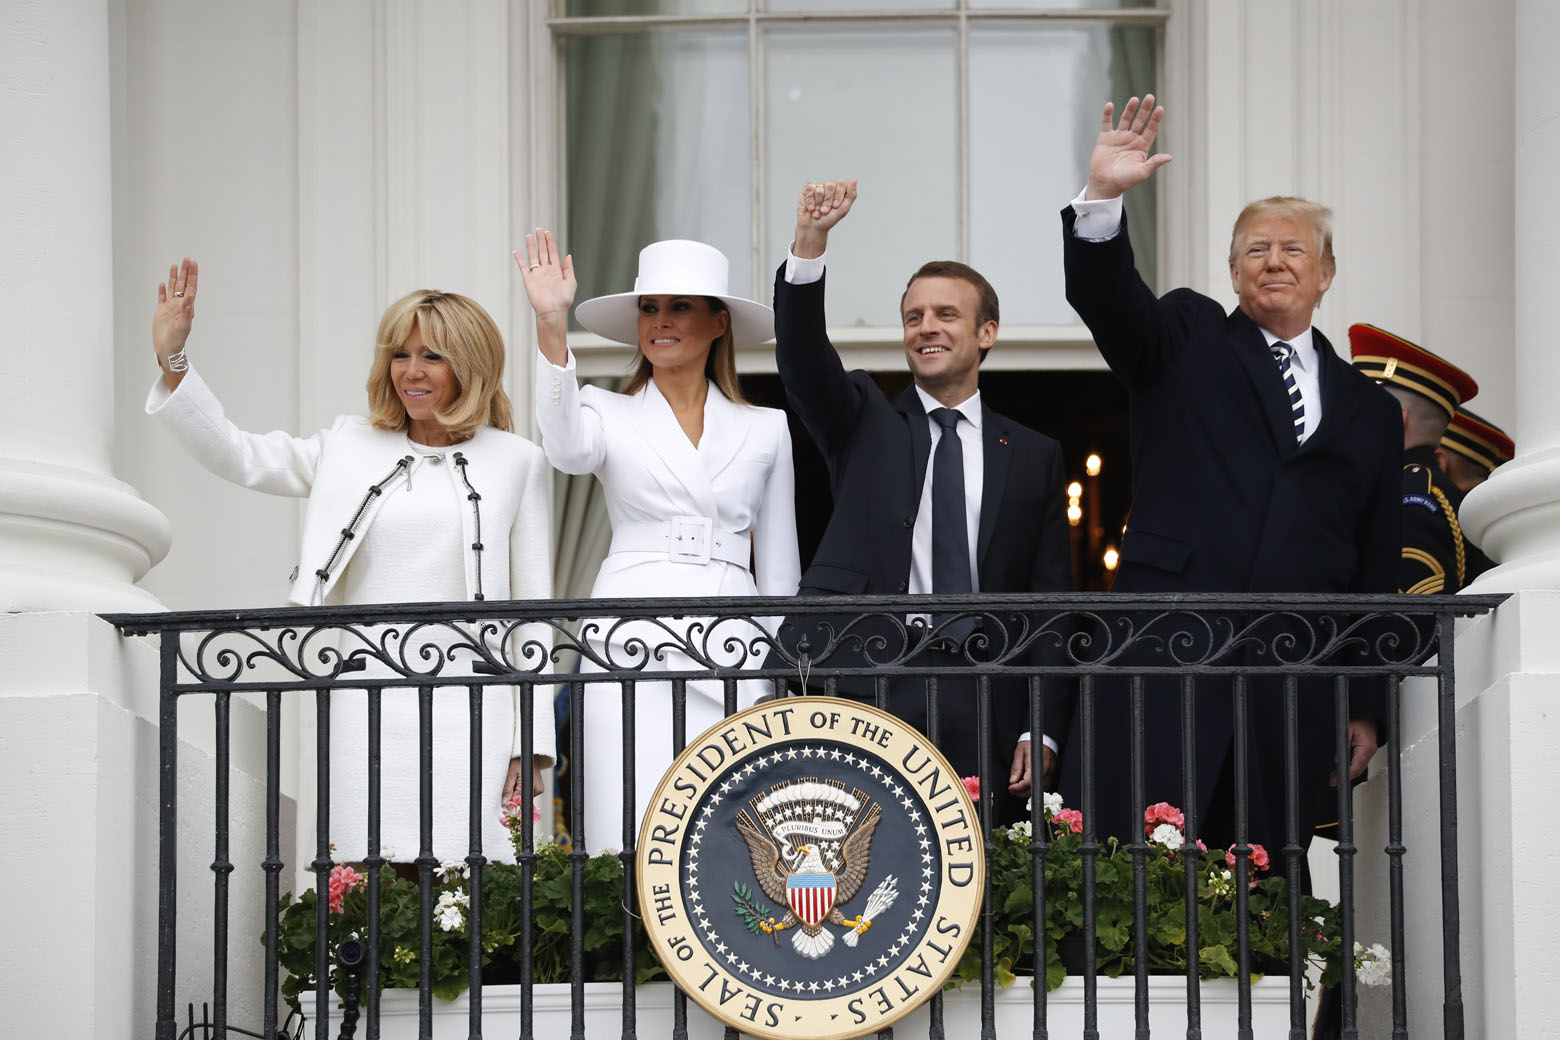 President Donald Trump, French President Emmanuel Macron, first lady Melania Trump and Brigitte Macron wave from the White House balcony during a State Arrival Ceremony at the White House in Washington, Tuesday, April 24, 2018. (AP Photo/Pablo Martinez Monsivais)